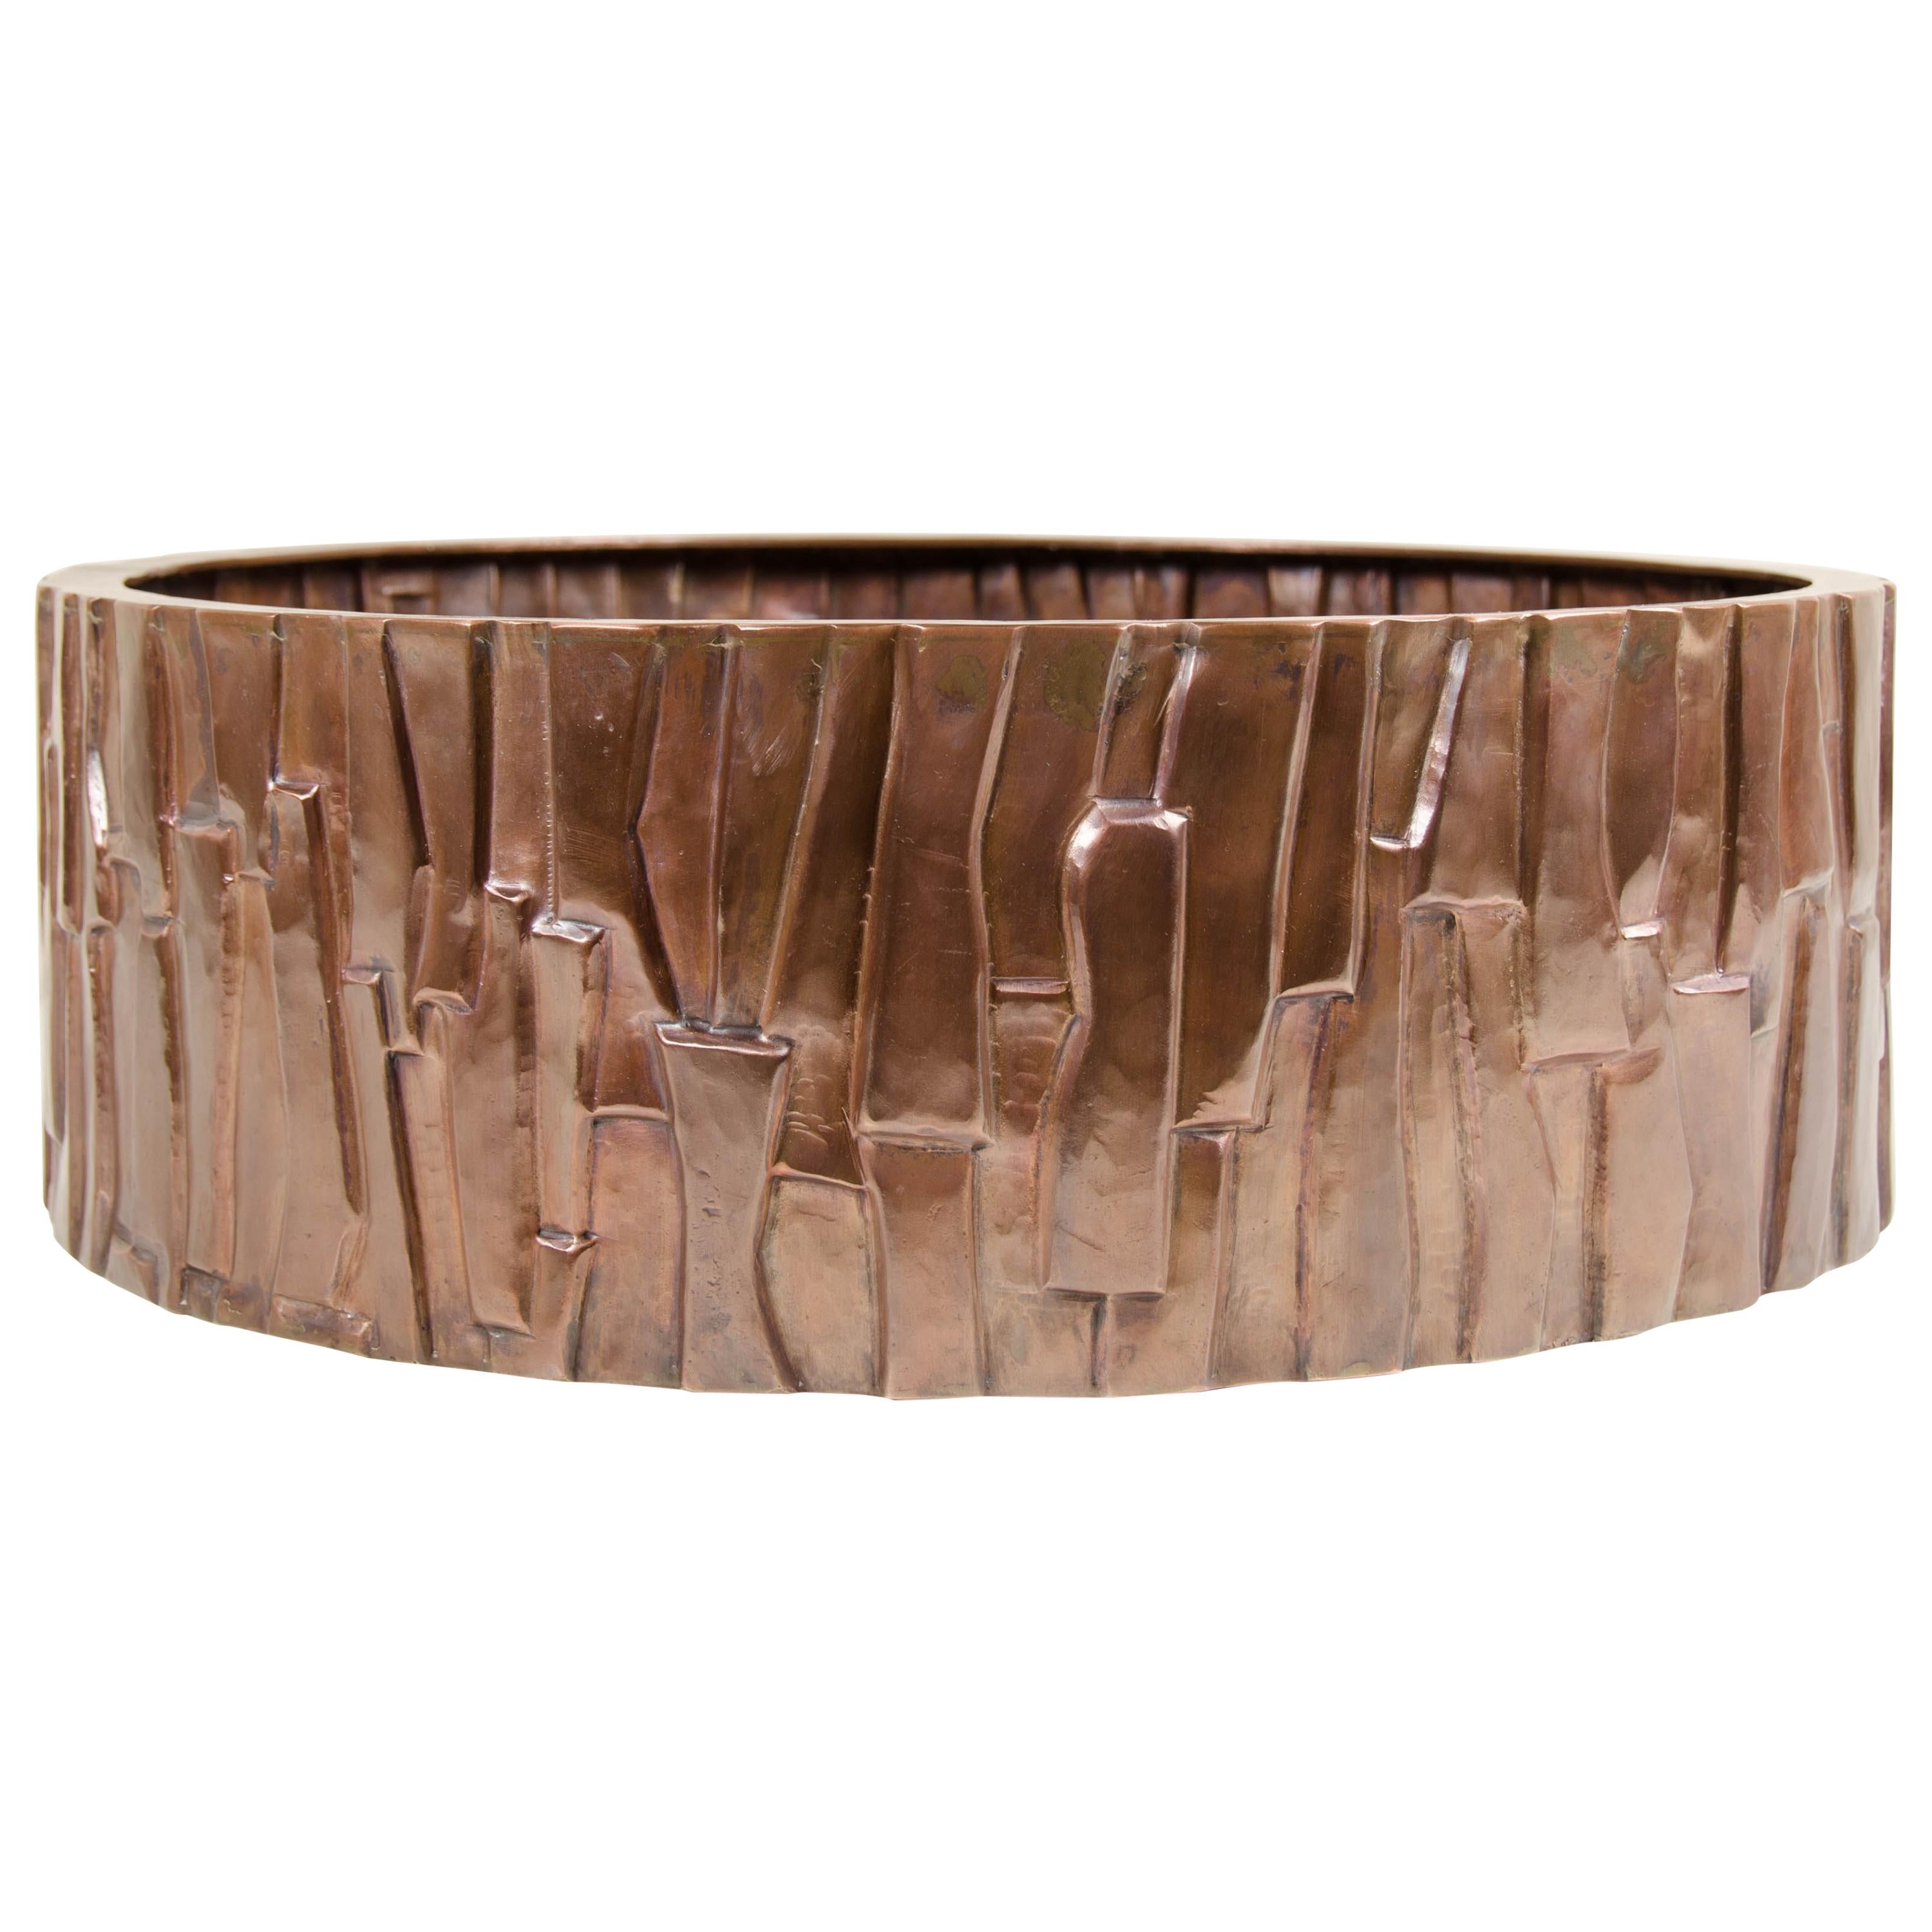 Kuai Design Low Cachepot, Copper by Robert Kuo, Hand Repoussé, Limited Edition For Sale